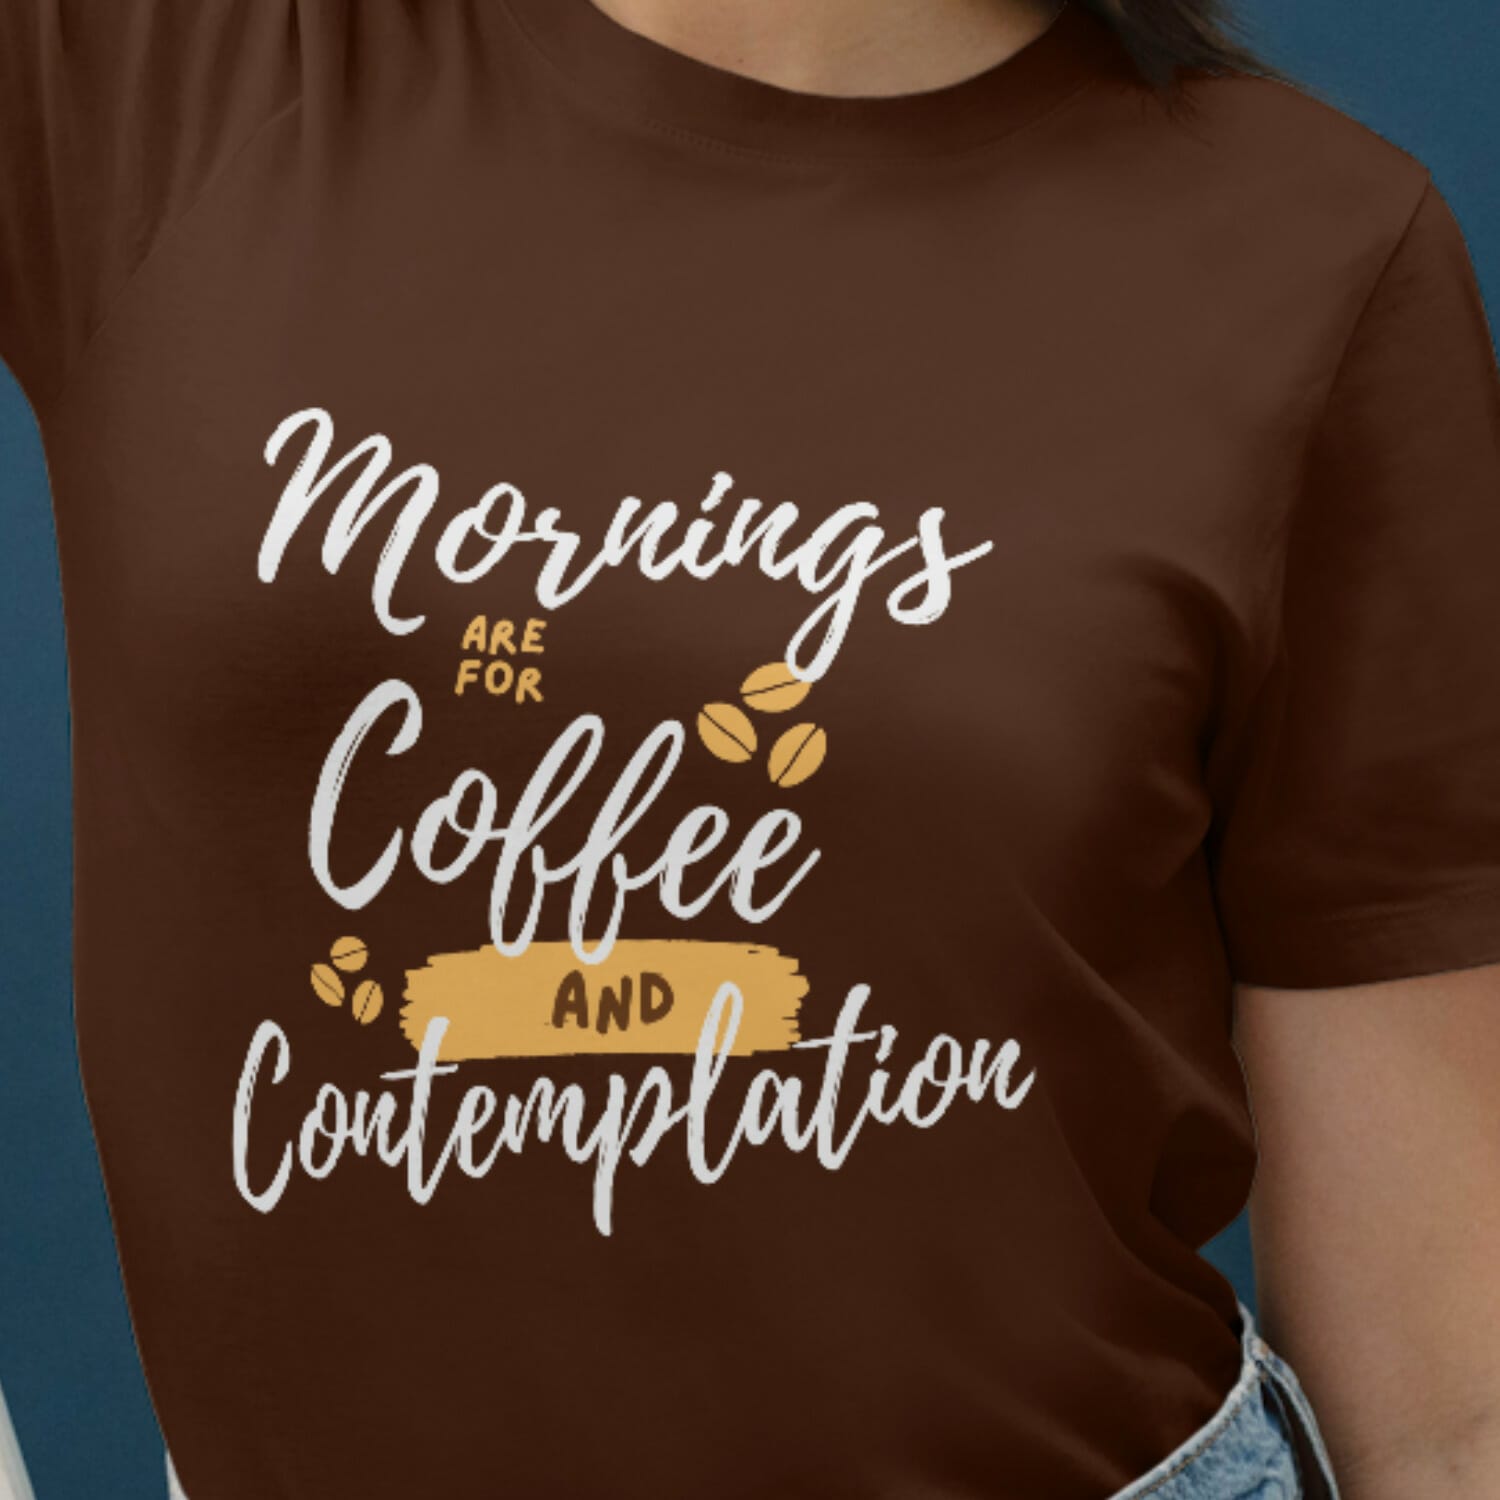 Mornings are for coffee and Contemplation Tshirt design